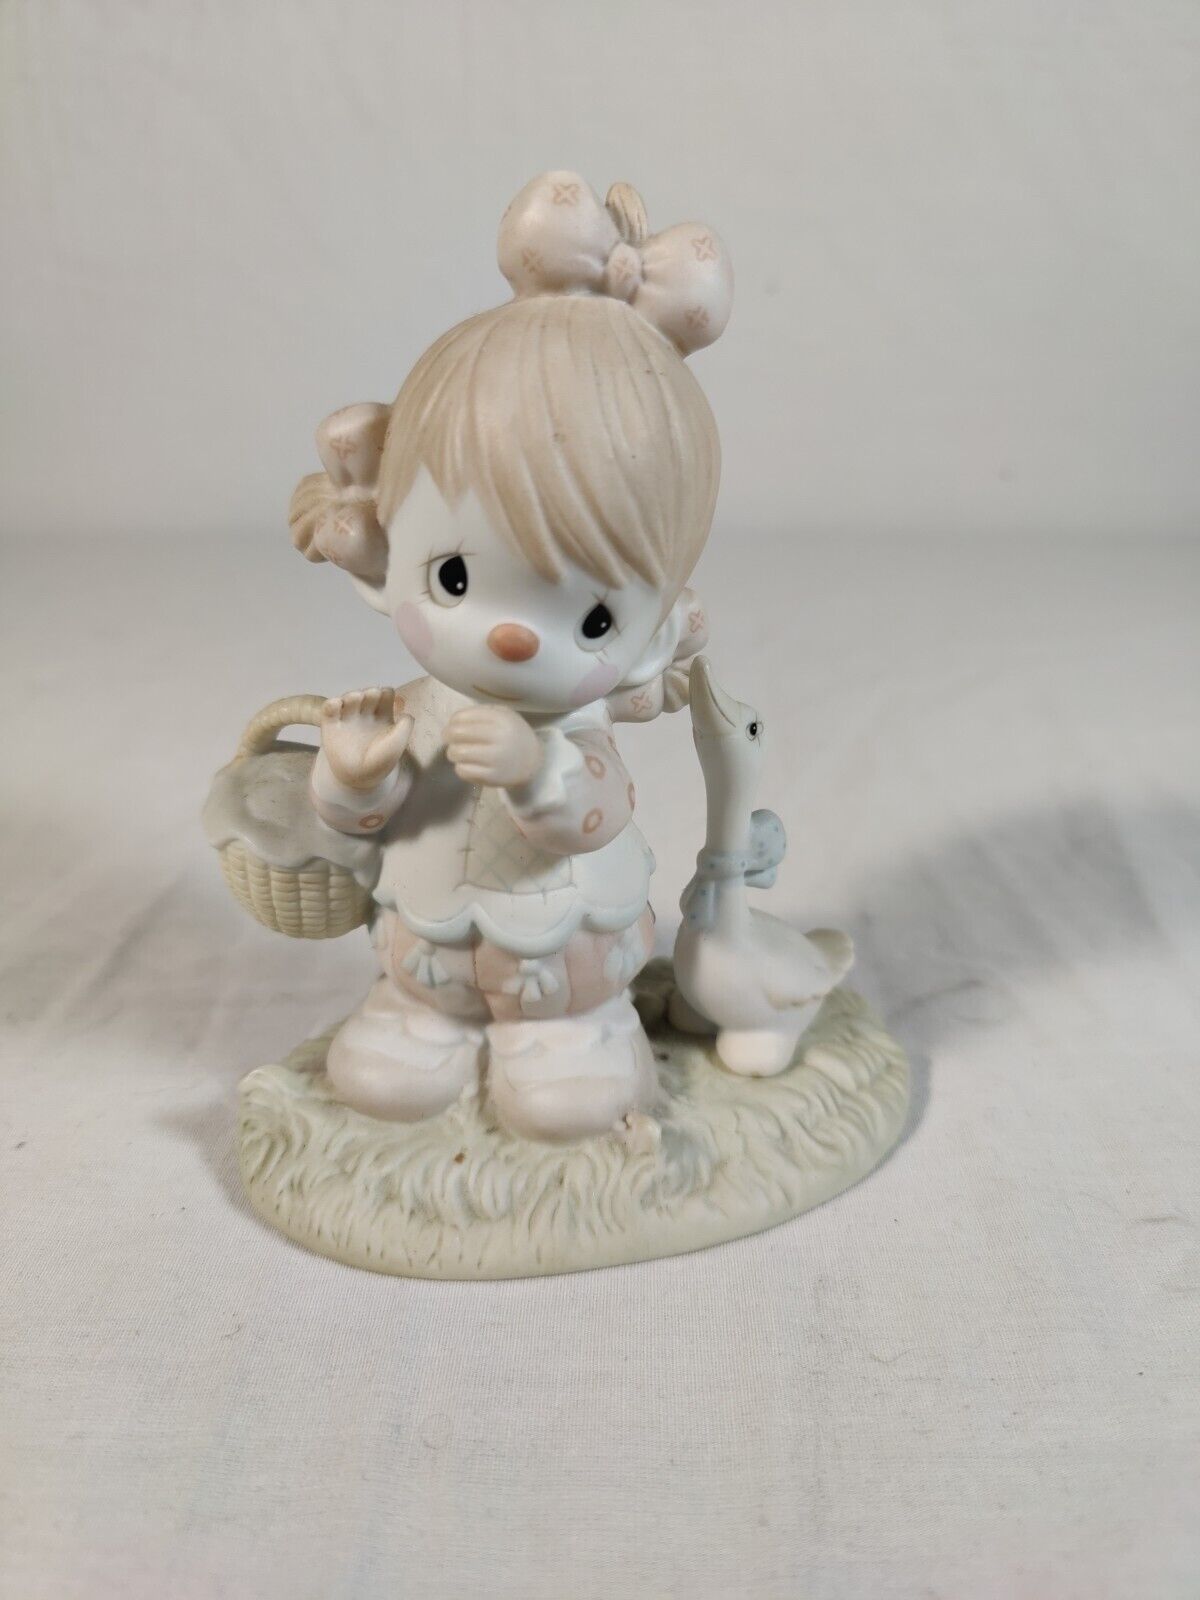 Vintage 1985 Precious Moments “Waddle I Do Without You” Porcelain Figurine Clown